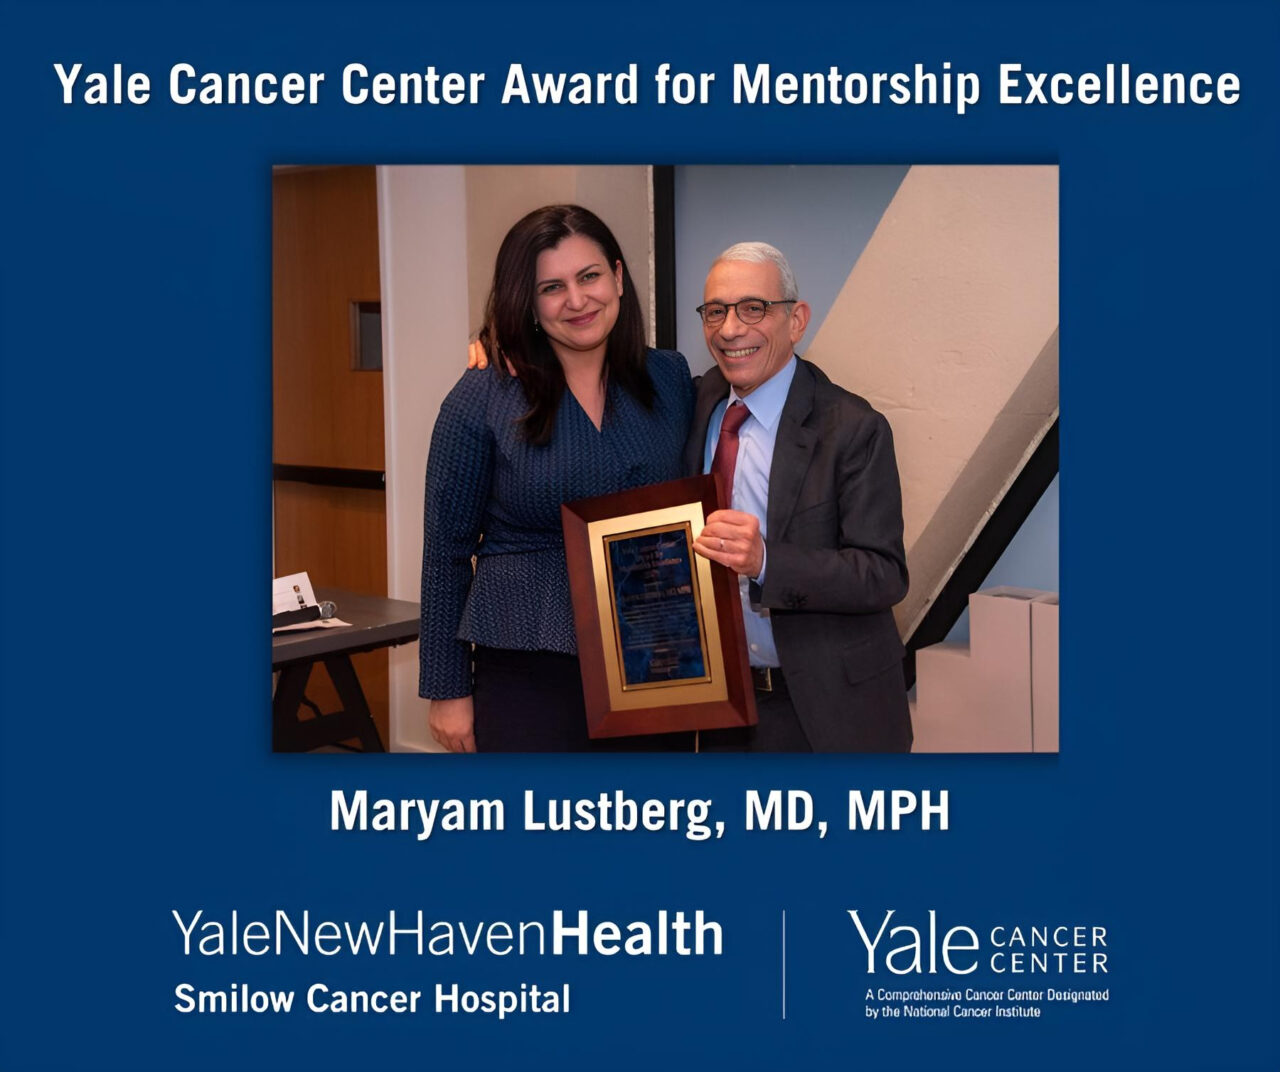 Maryam Lustberg: Thank you Yale Cancer Center for this honor